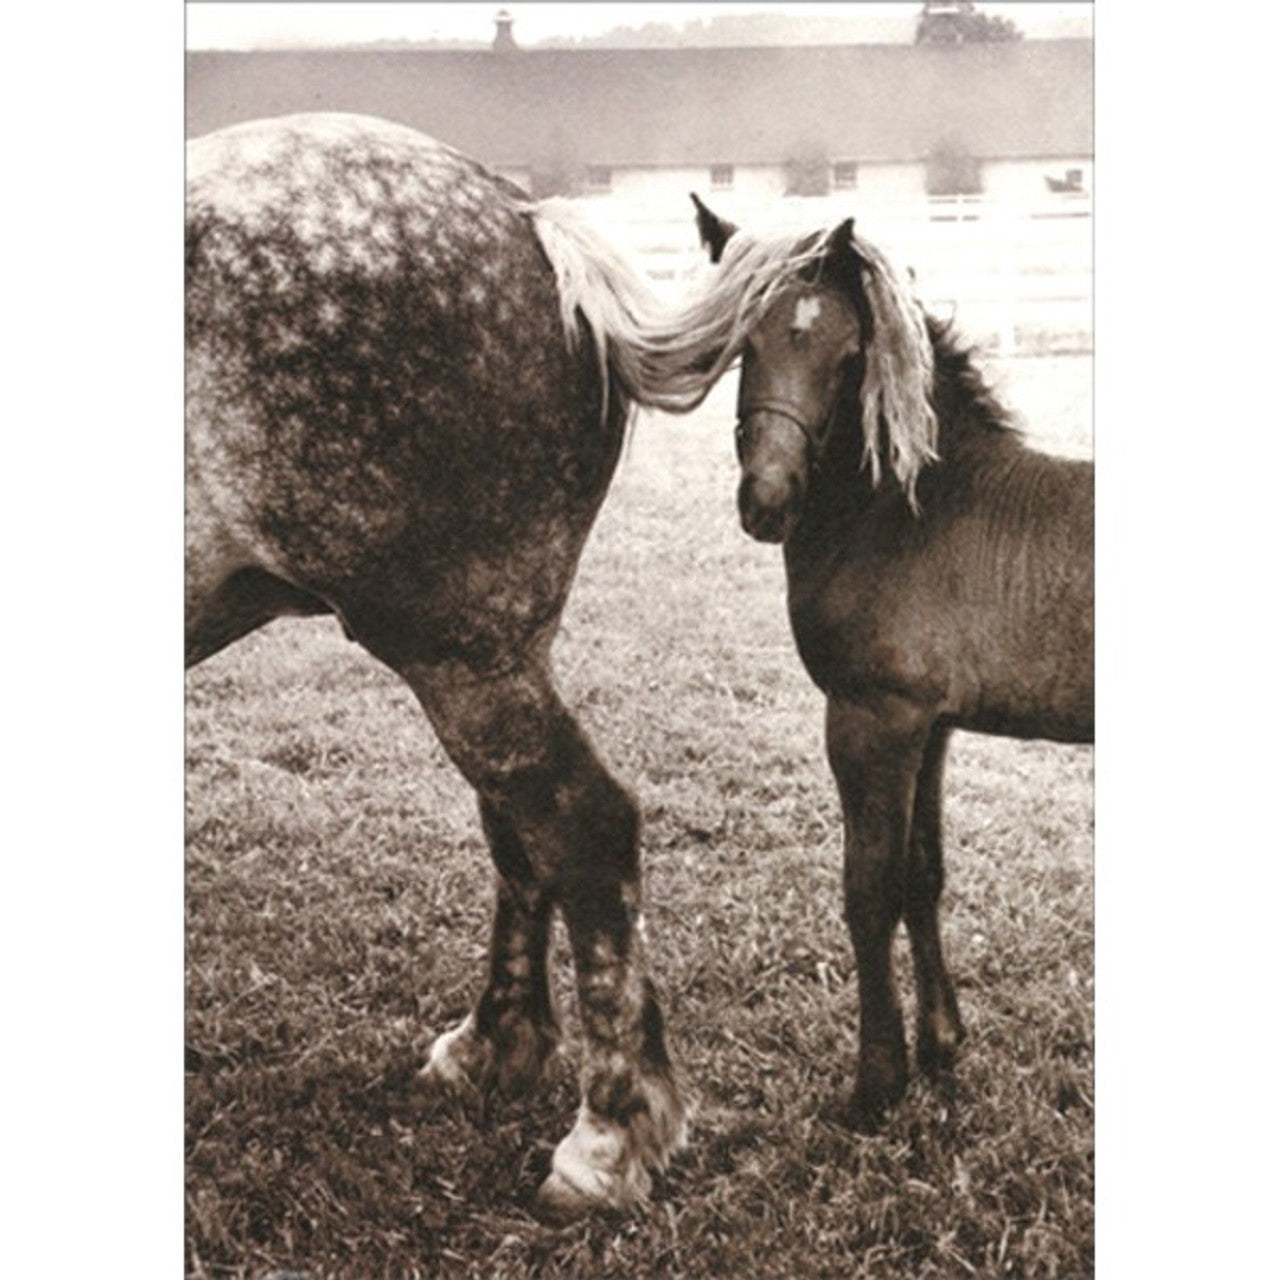 Hang In There/ Support/ Encouragement Greeting Card - Foal Under Horse's Tail